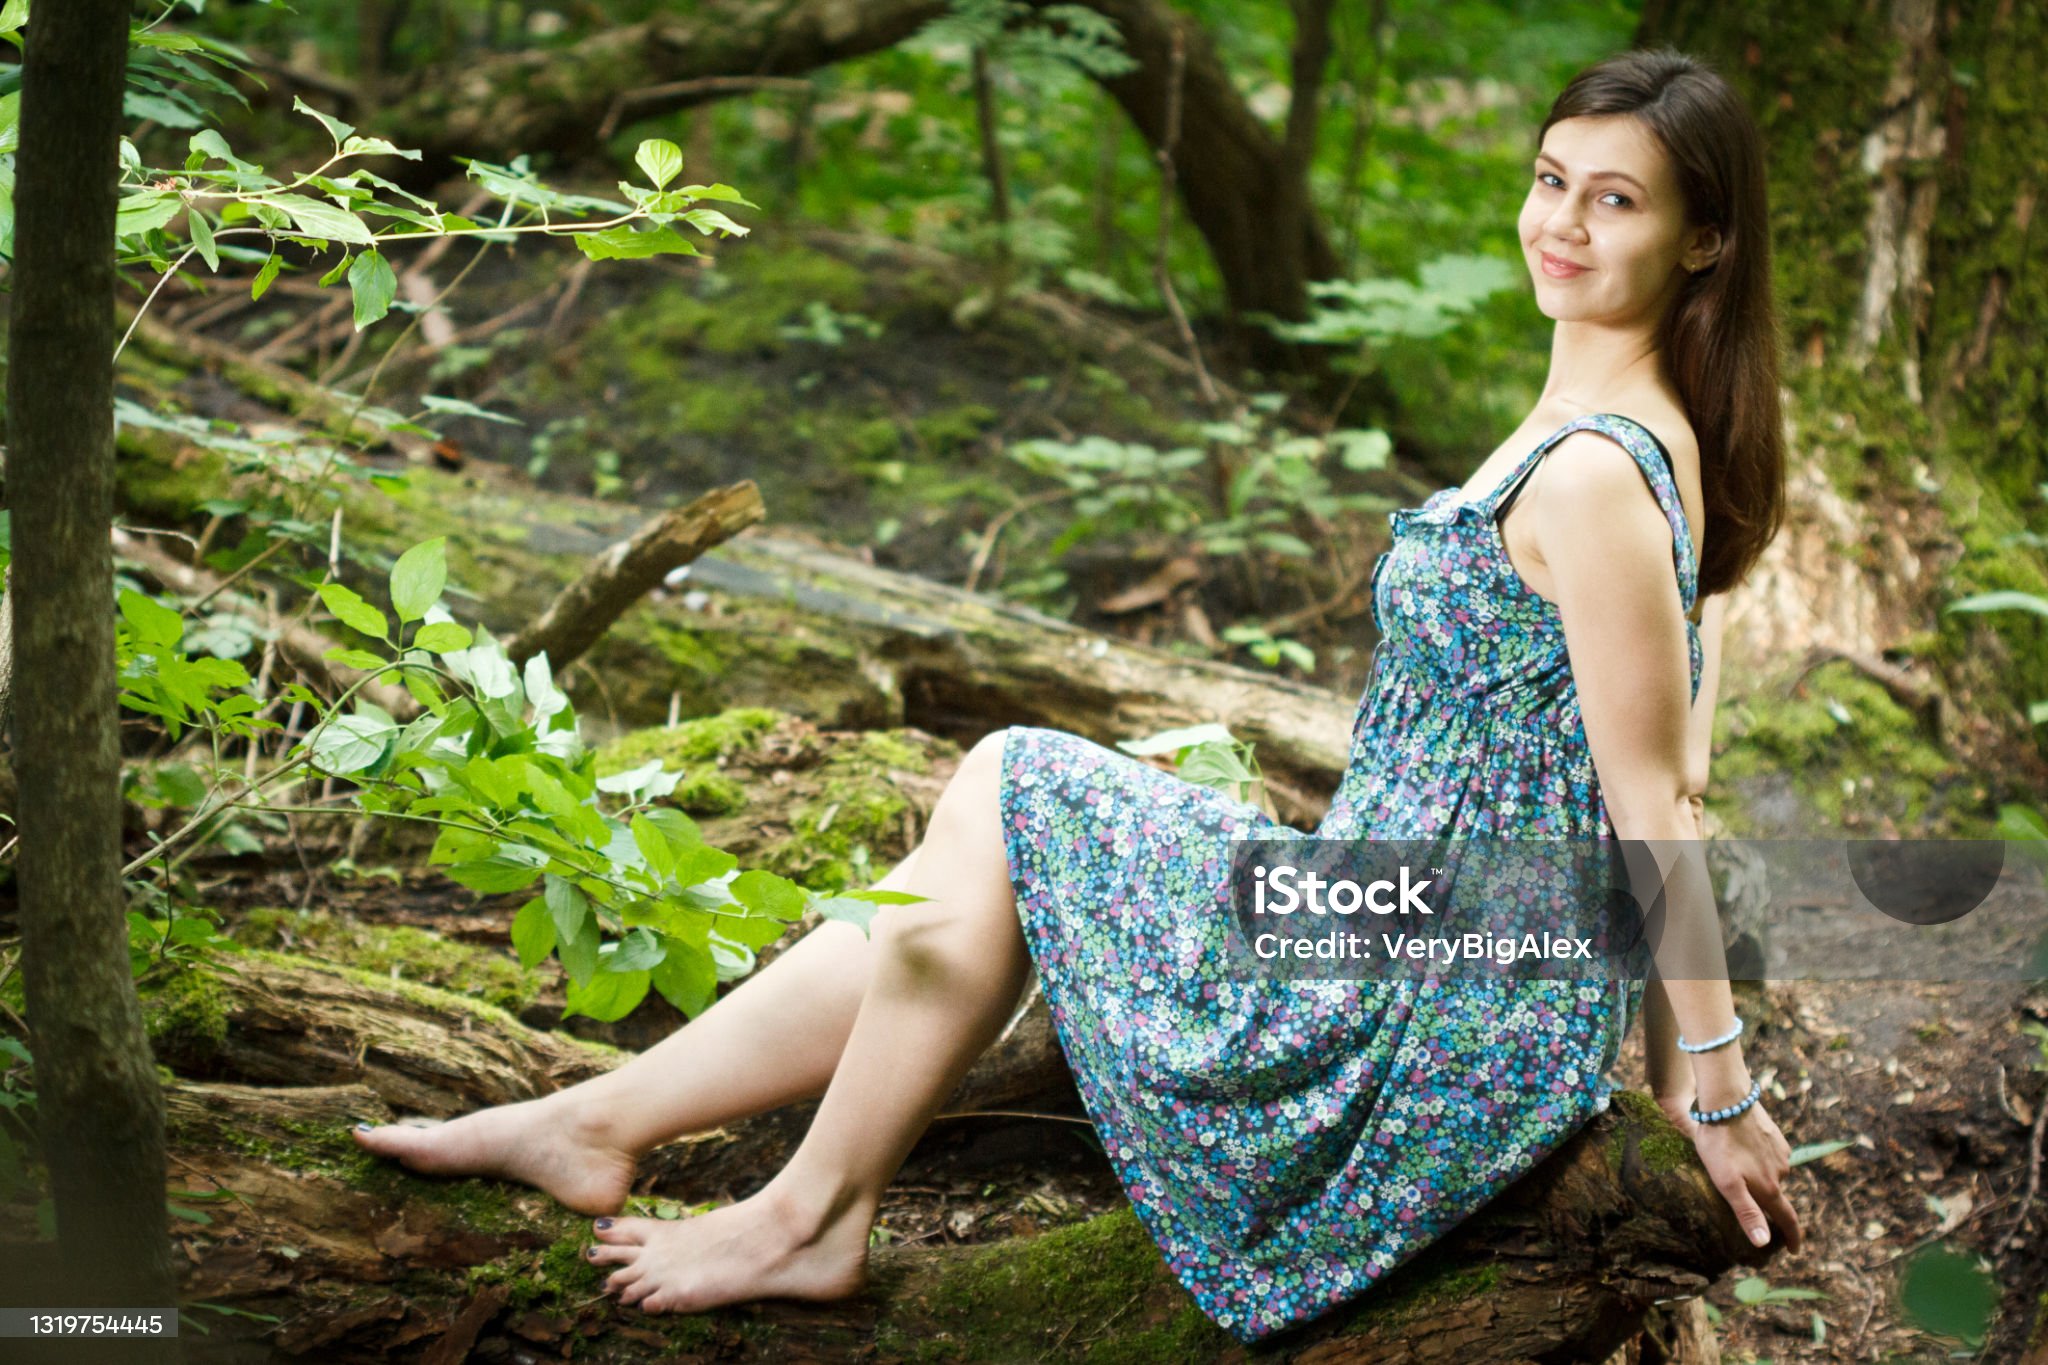 https://media.istockphoto.com/id/1319754445/photo/beautiful-young-woman-wearing-elegant-white-dress-walking-on-a-forest-path-with-rays-of.jpg?s=2048x2048&amp;w=is&amp;k=20&amp;c=I3jH9d2-Y900sUrp3D04fklt9Spm-WWwwzYsG0tWVEA=